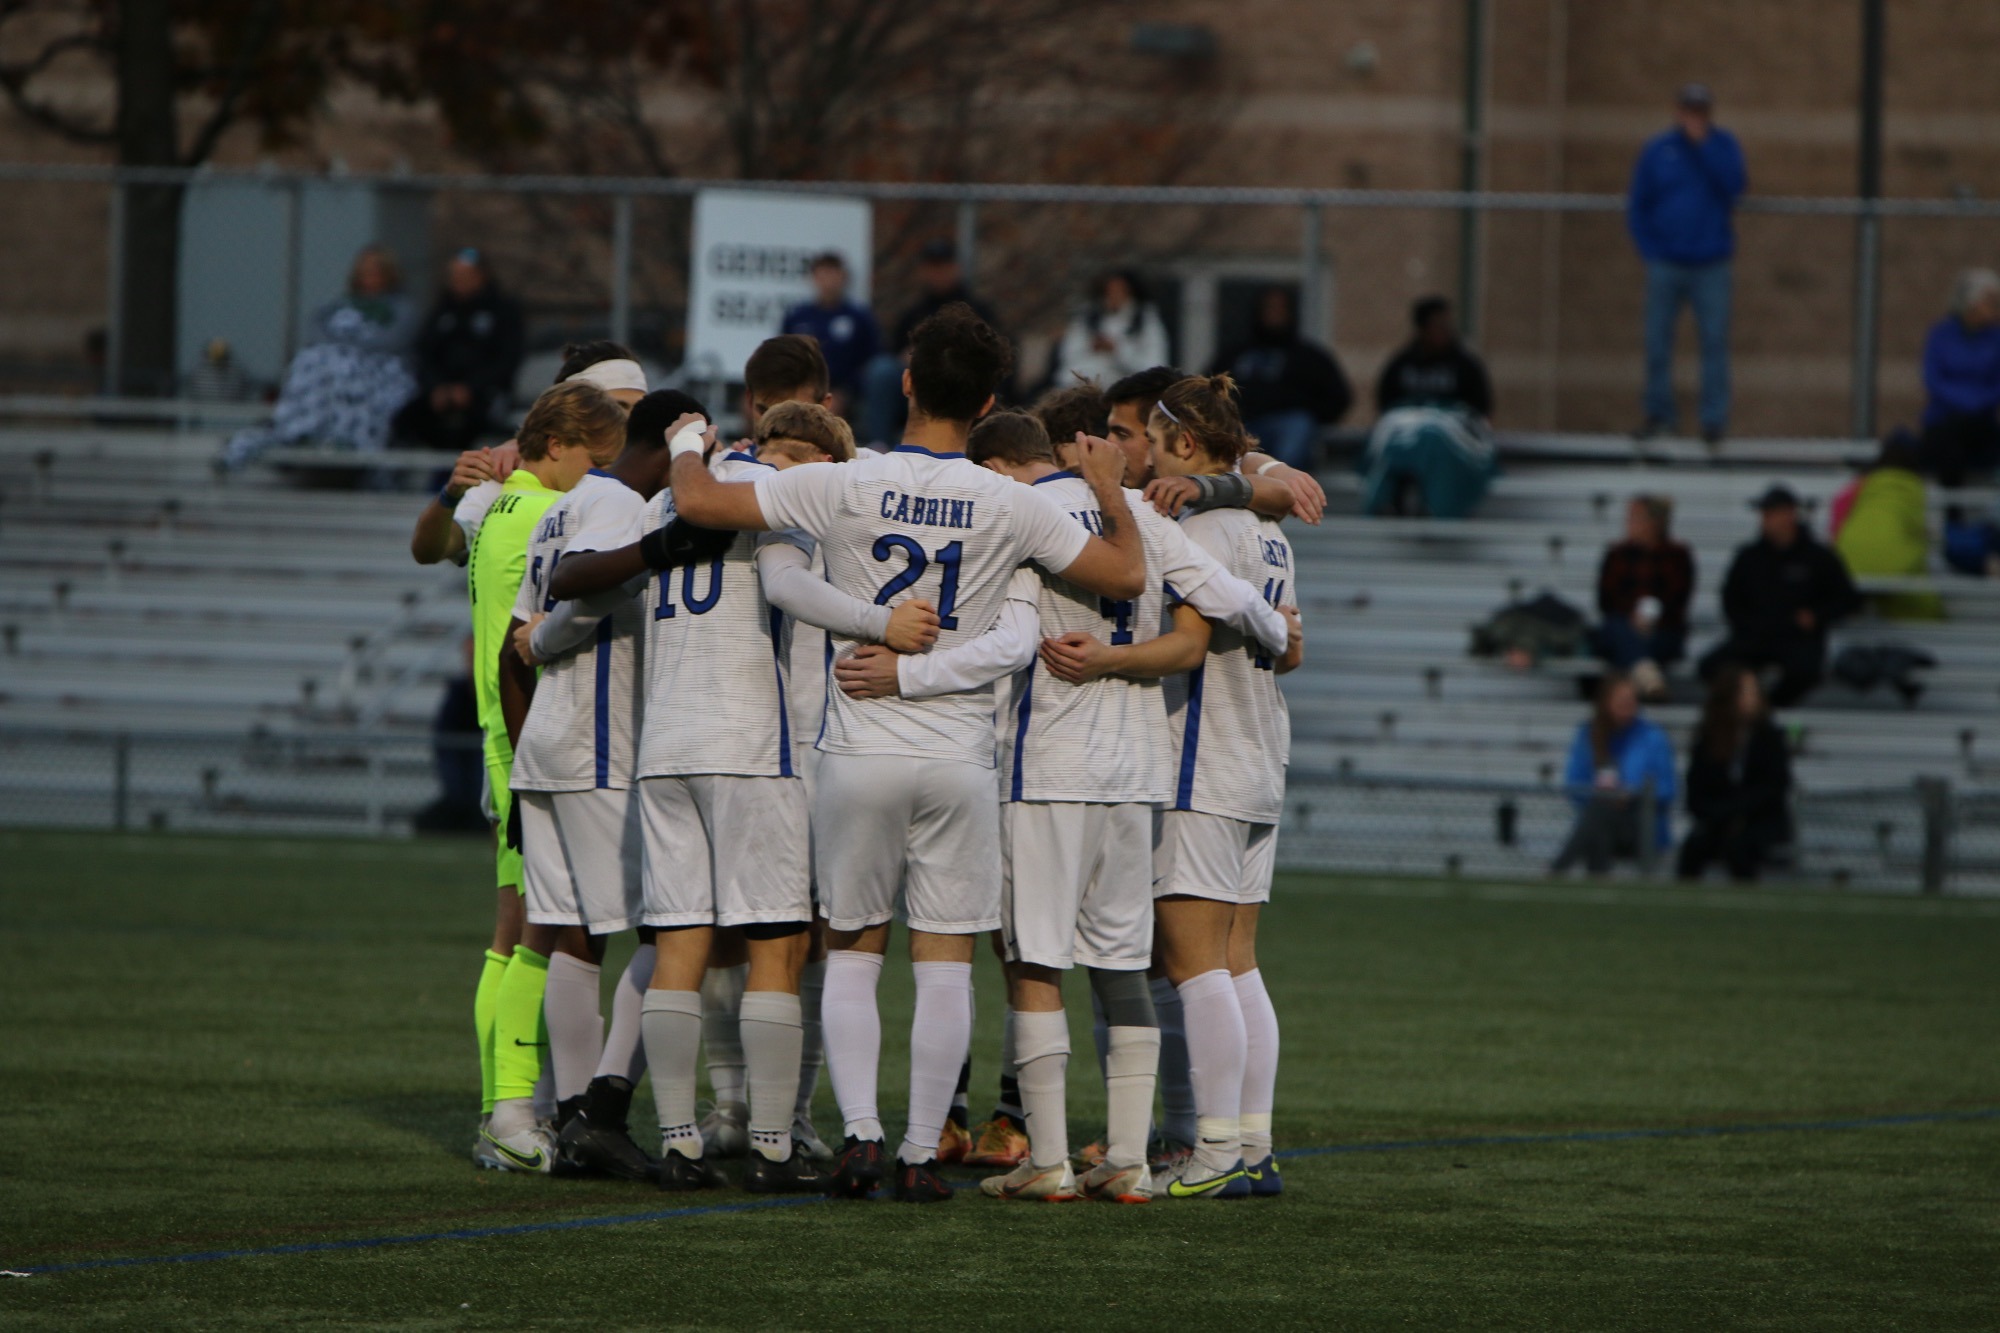 Photo of Cabrini's Mens soccer team huddling up during a game.